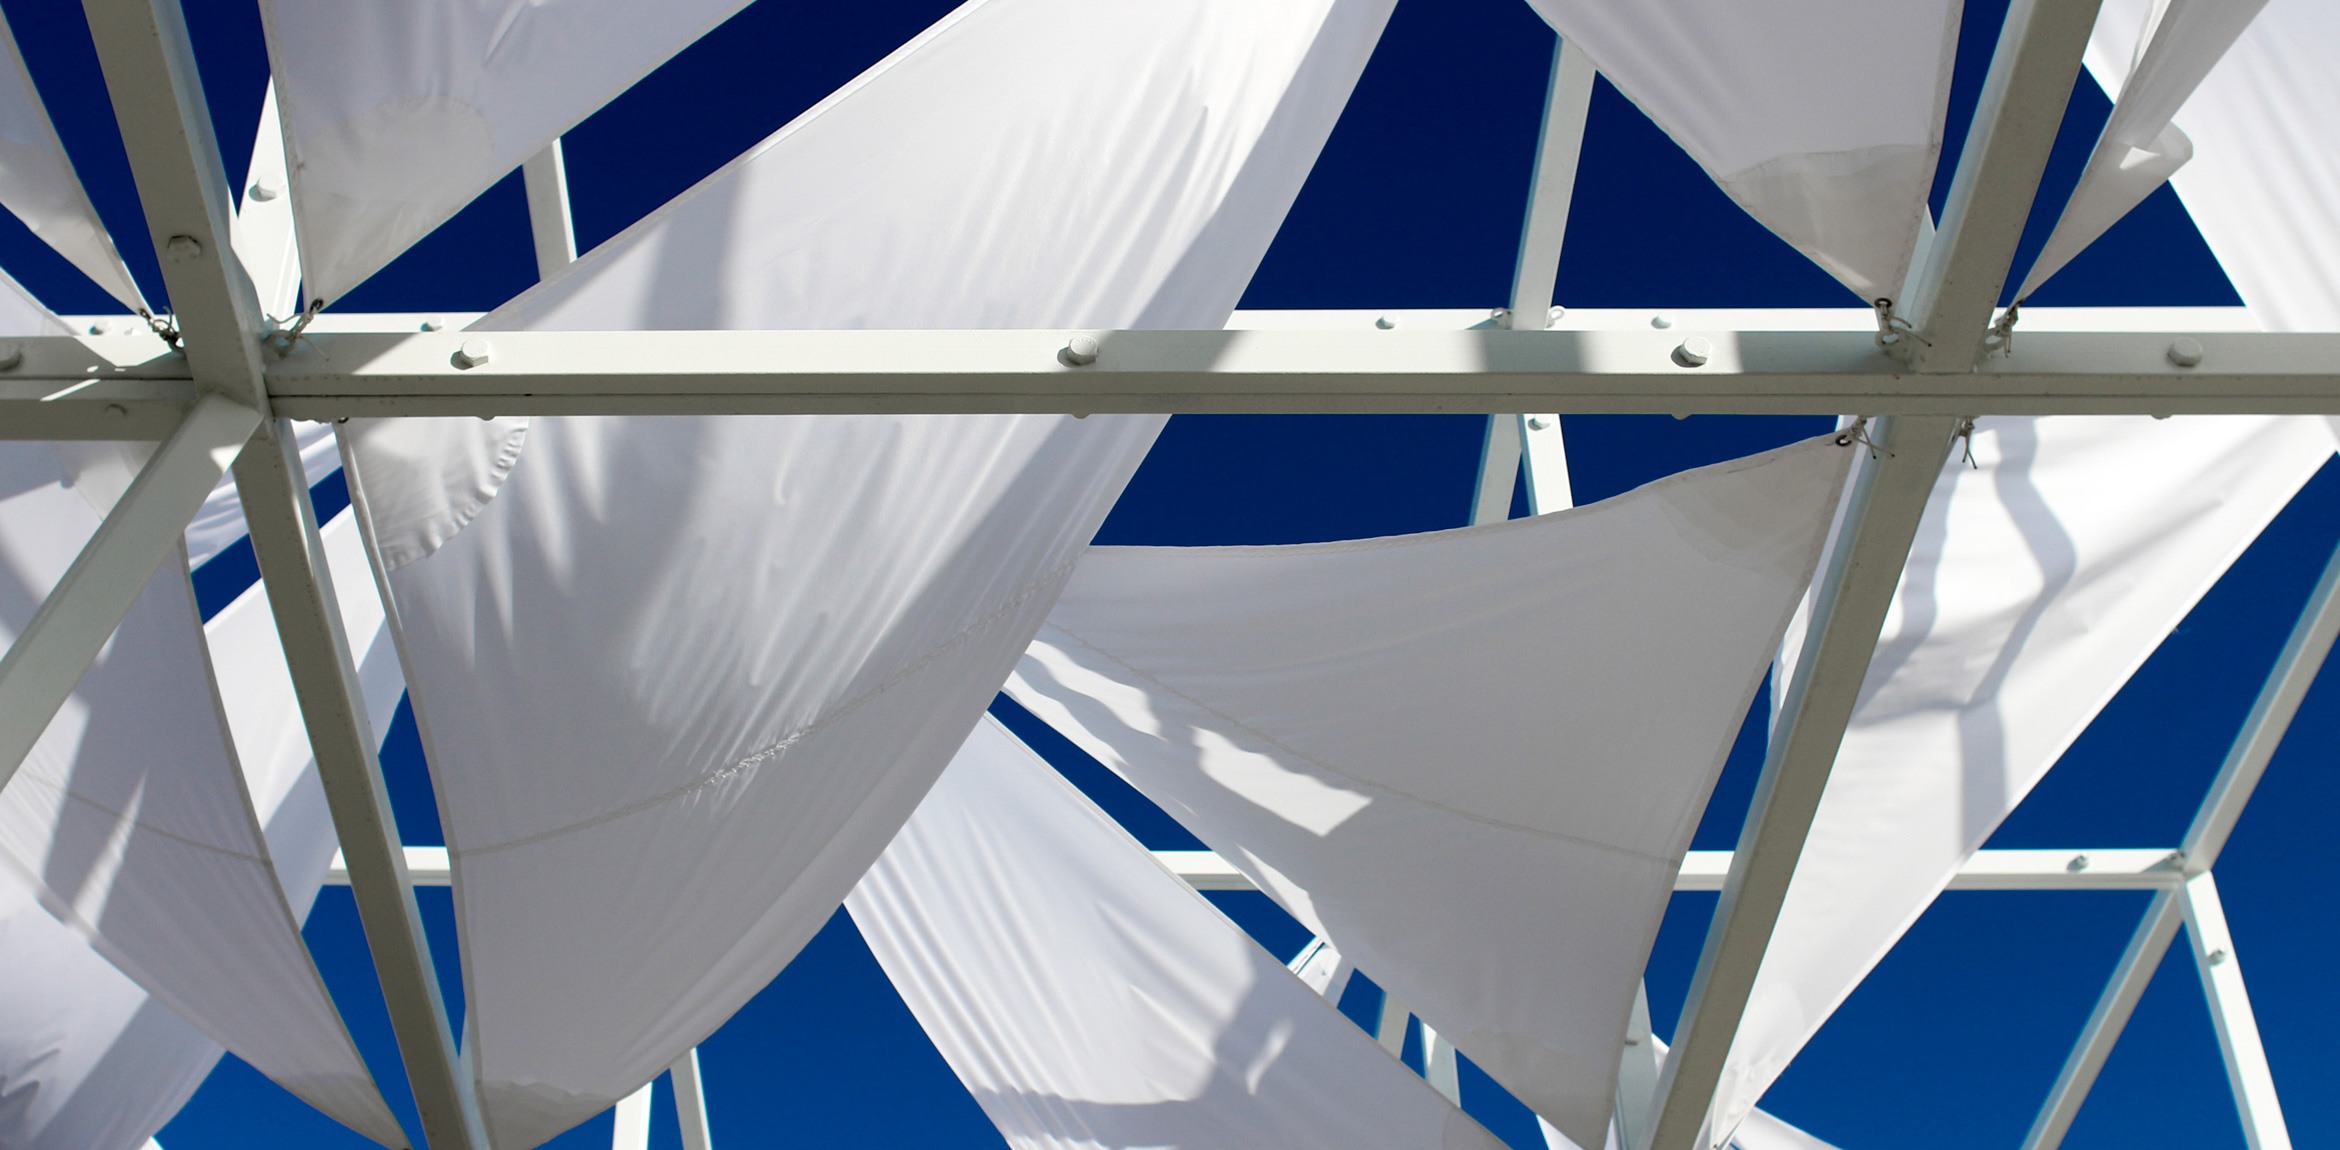 A view of the Lots installation white canpoy fabric pieces against a blue sky.